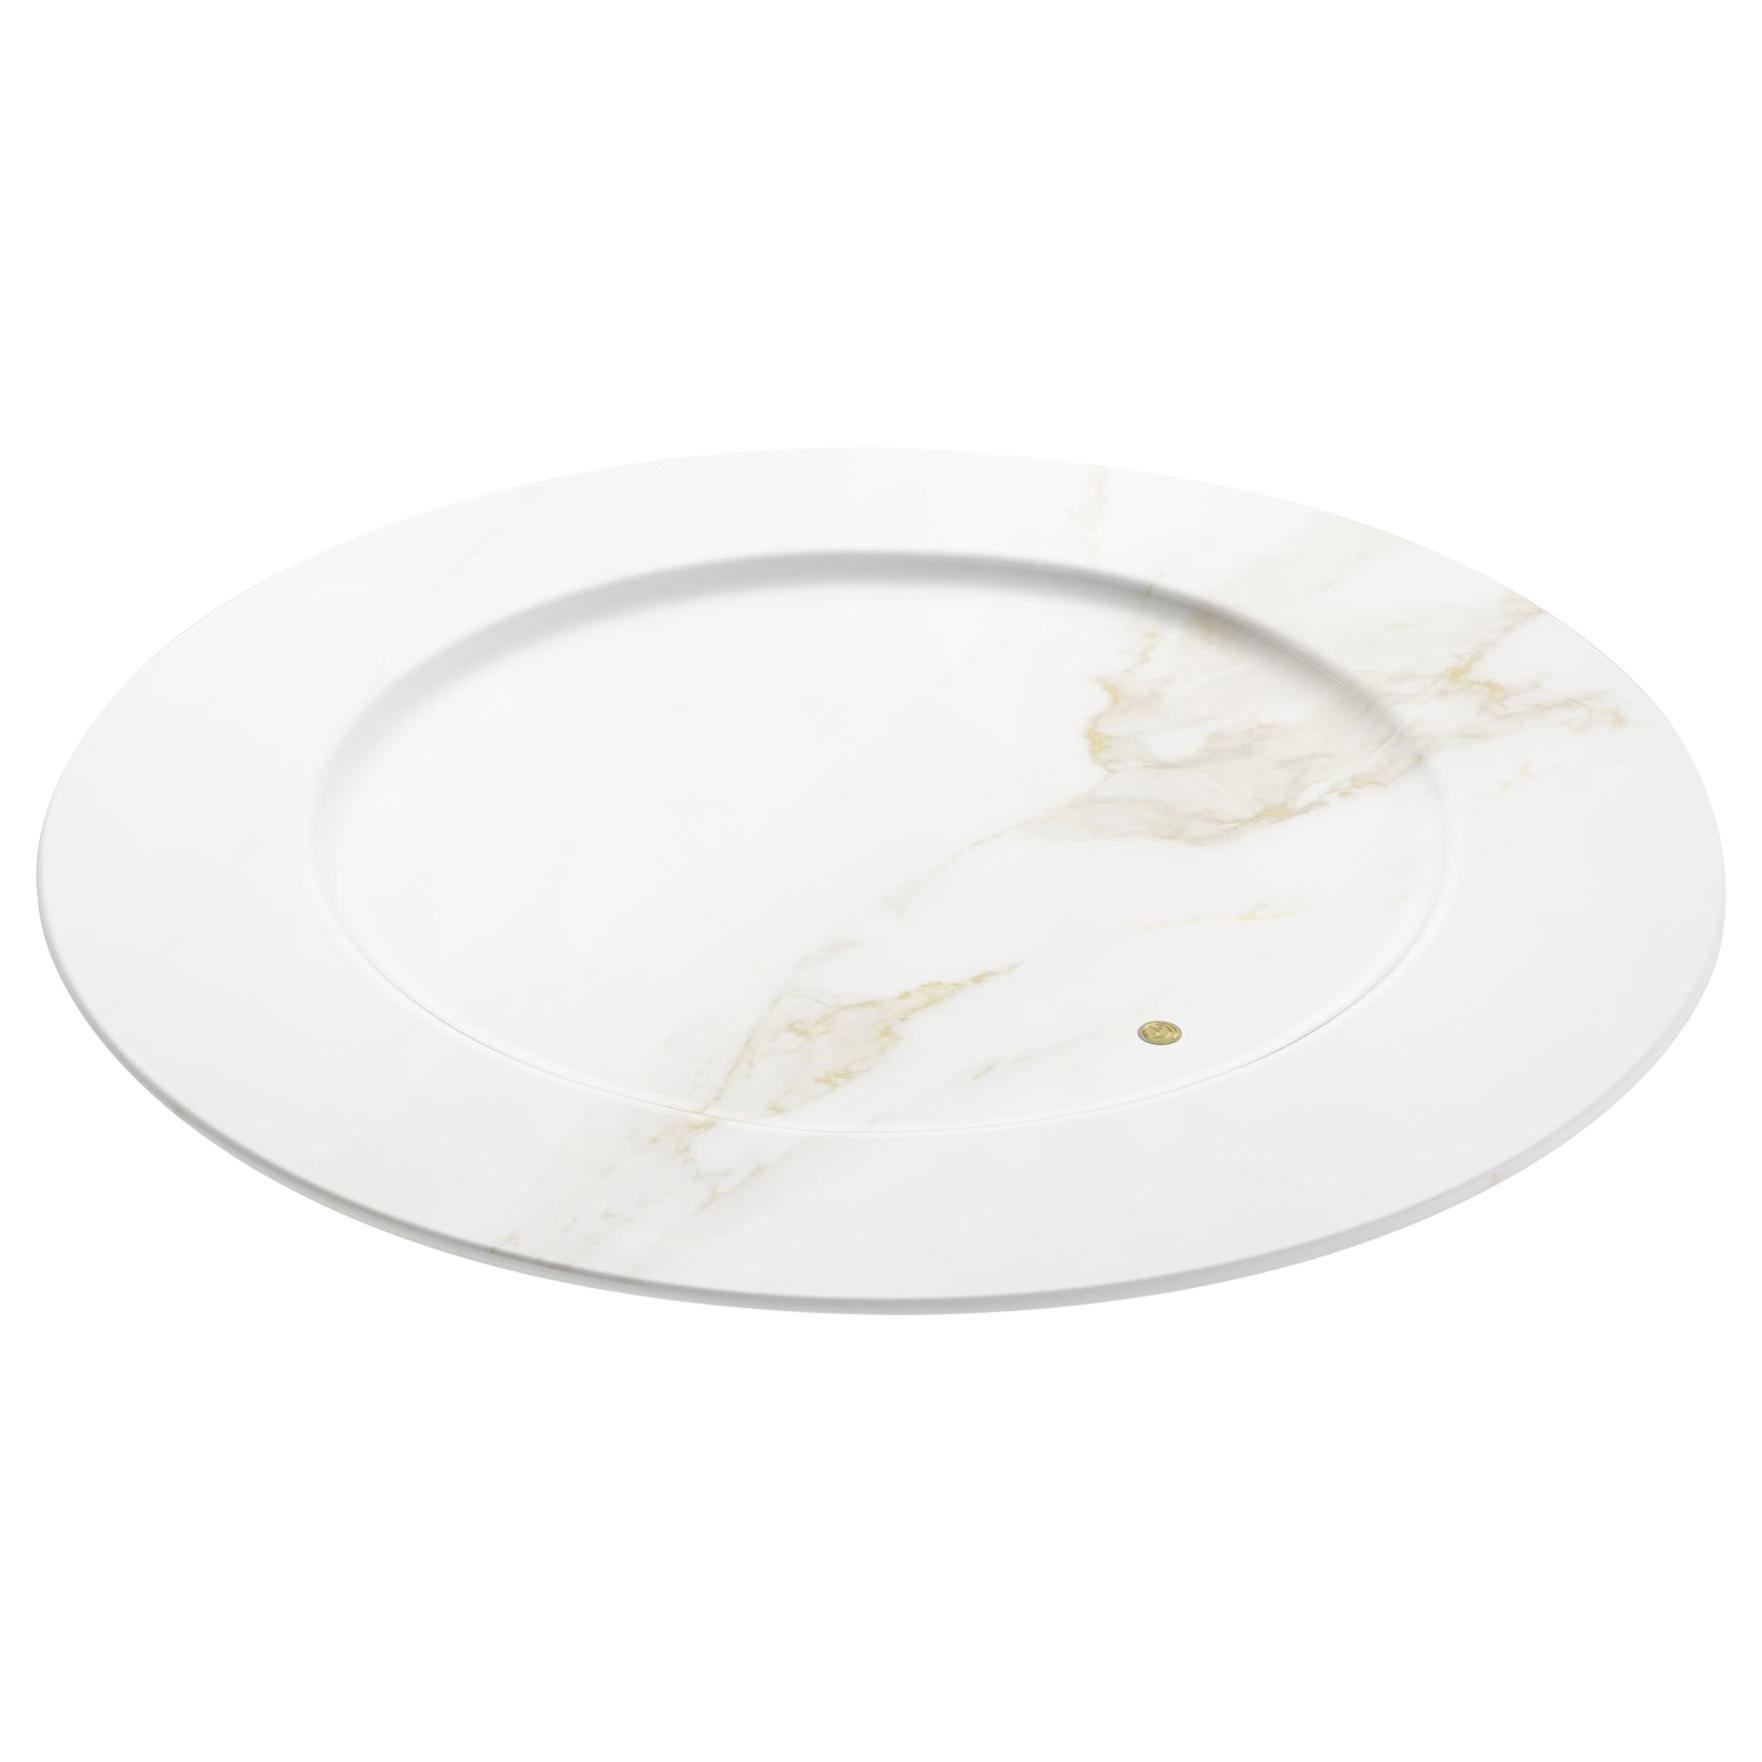 Charger Plate Platters Serveware White Calacatta Marble Collectible Design Italy